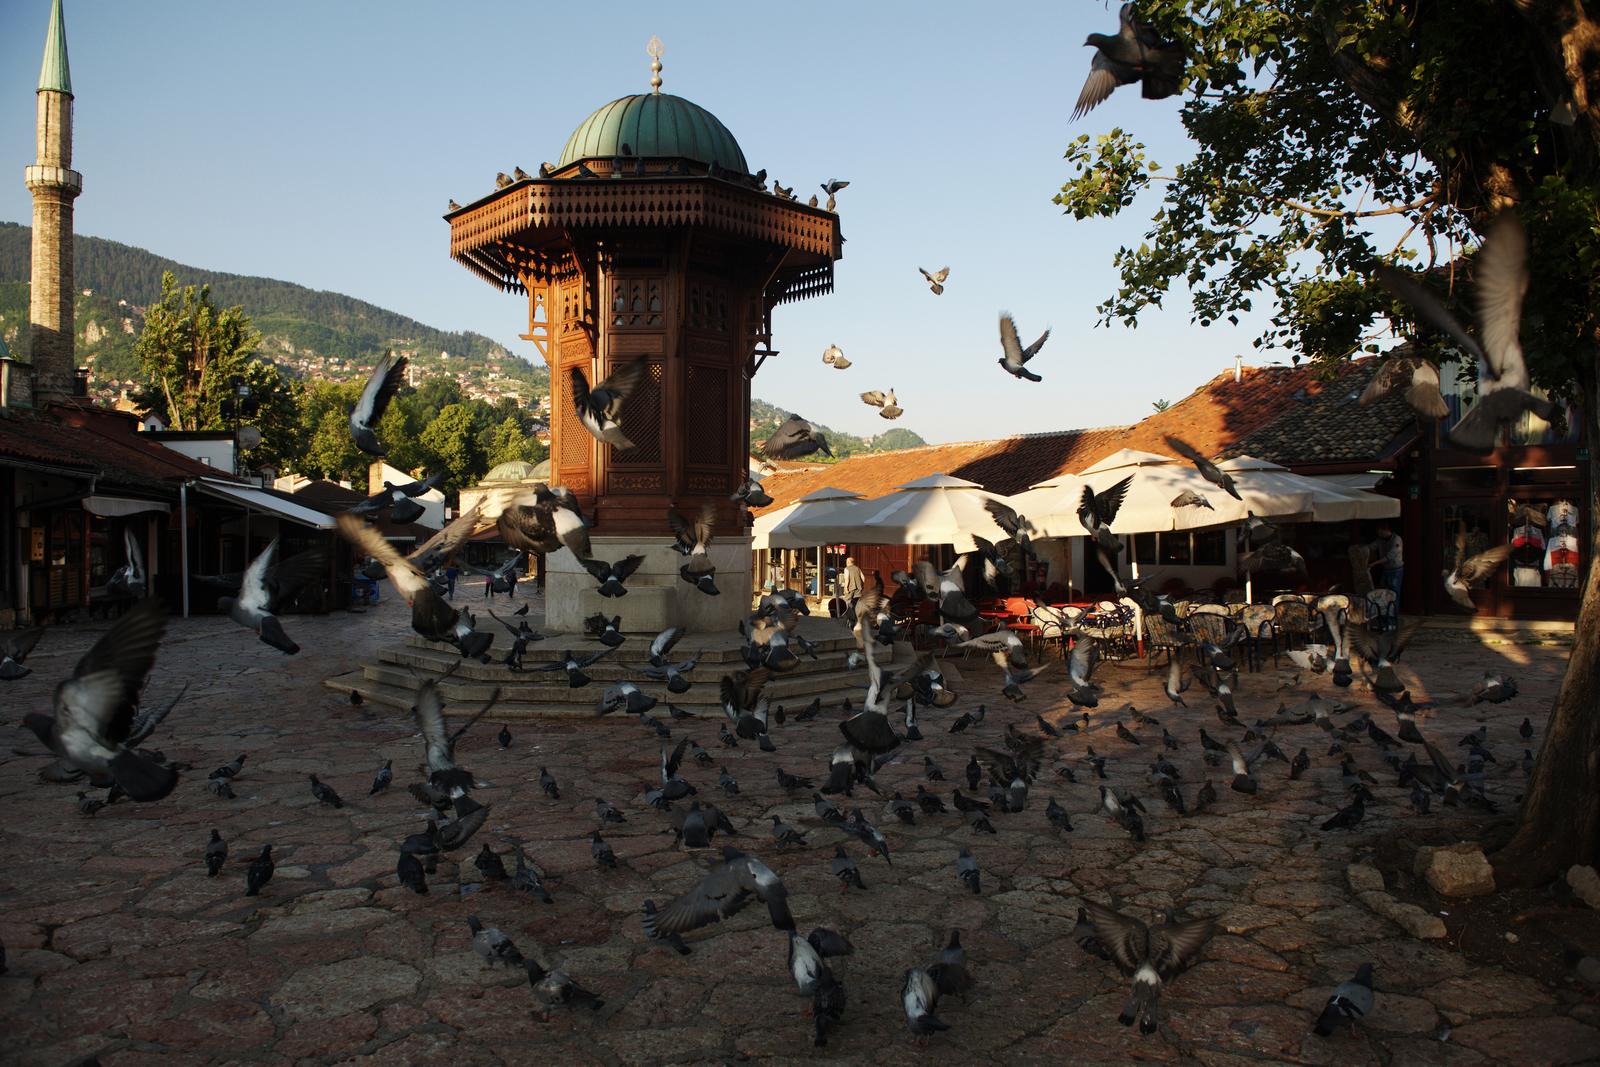 sarajevo old city - one of the things to do in sarajevo